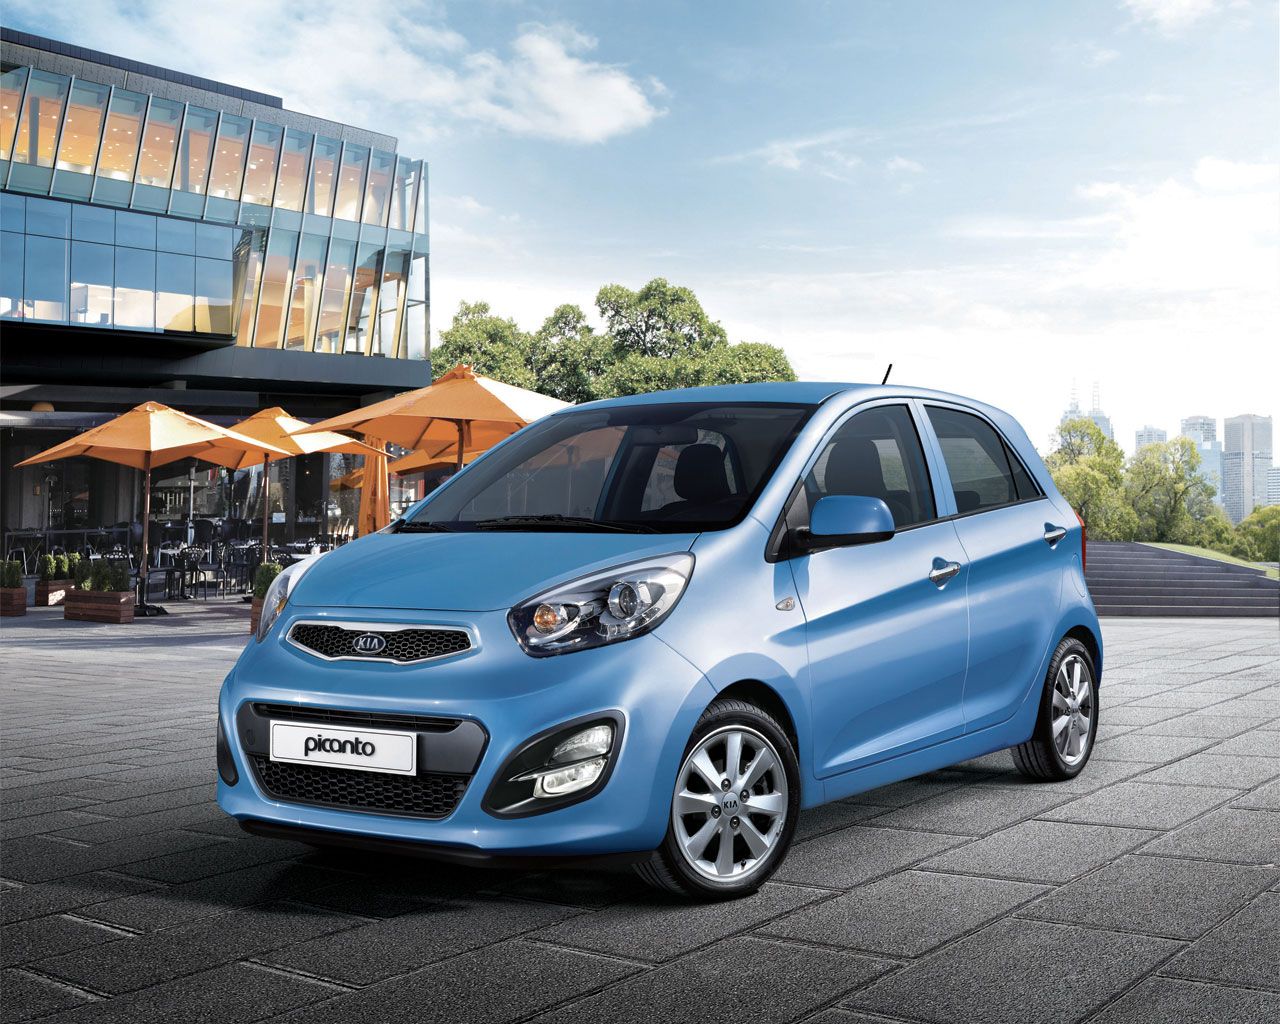 The Kia Picanto has arrived at Col Crawford Kia Dealership Sydney.